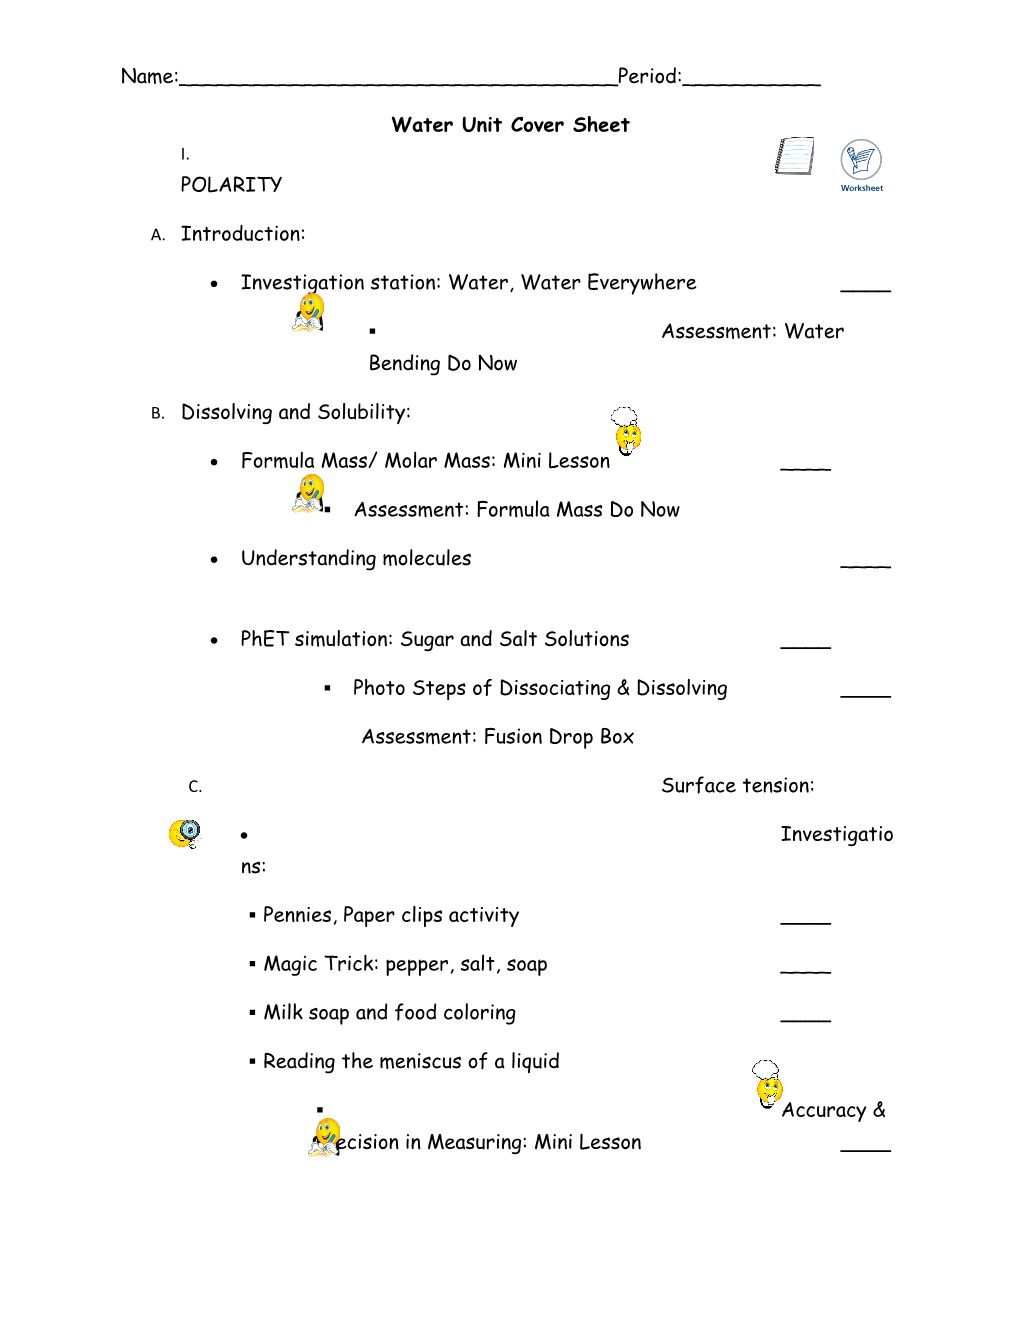 Water Unit Cover Sheet